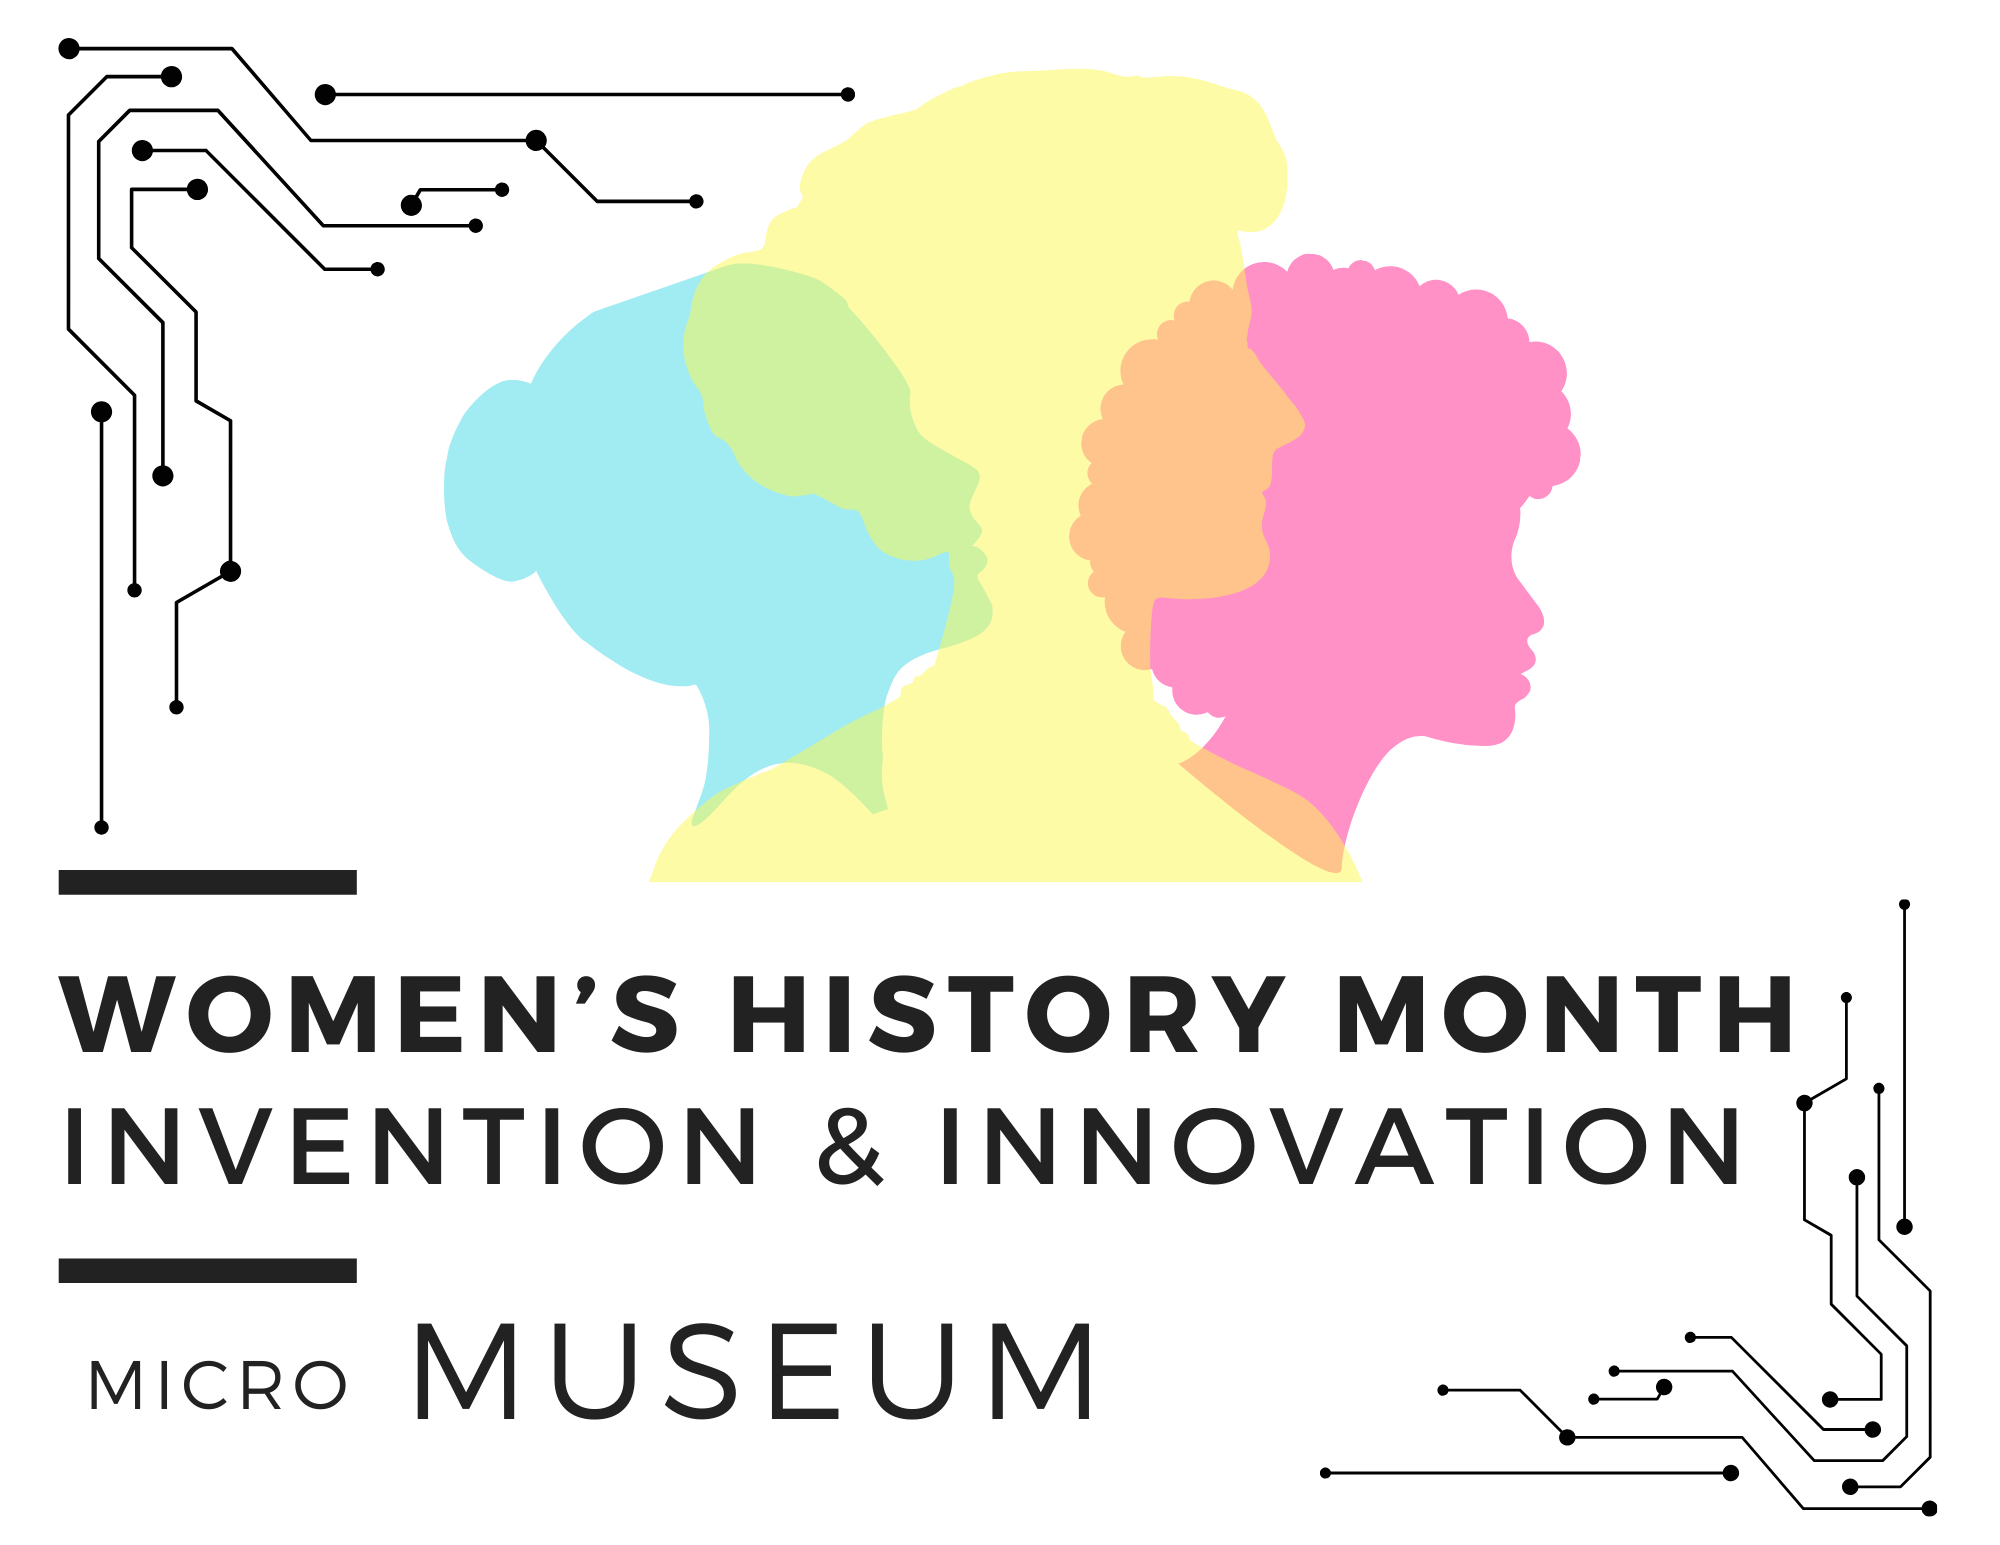 Picture of 3 Silhouettes of women with the text Women's History Month Invention & Innovation micro museum